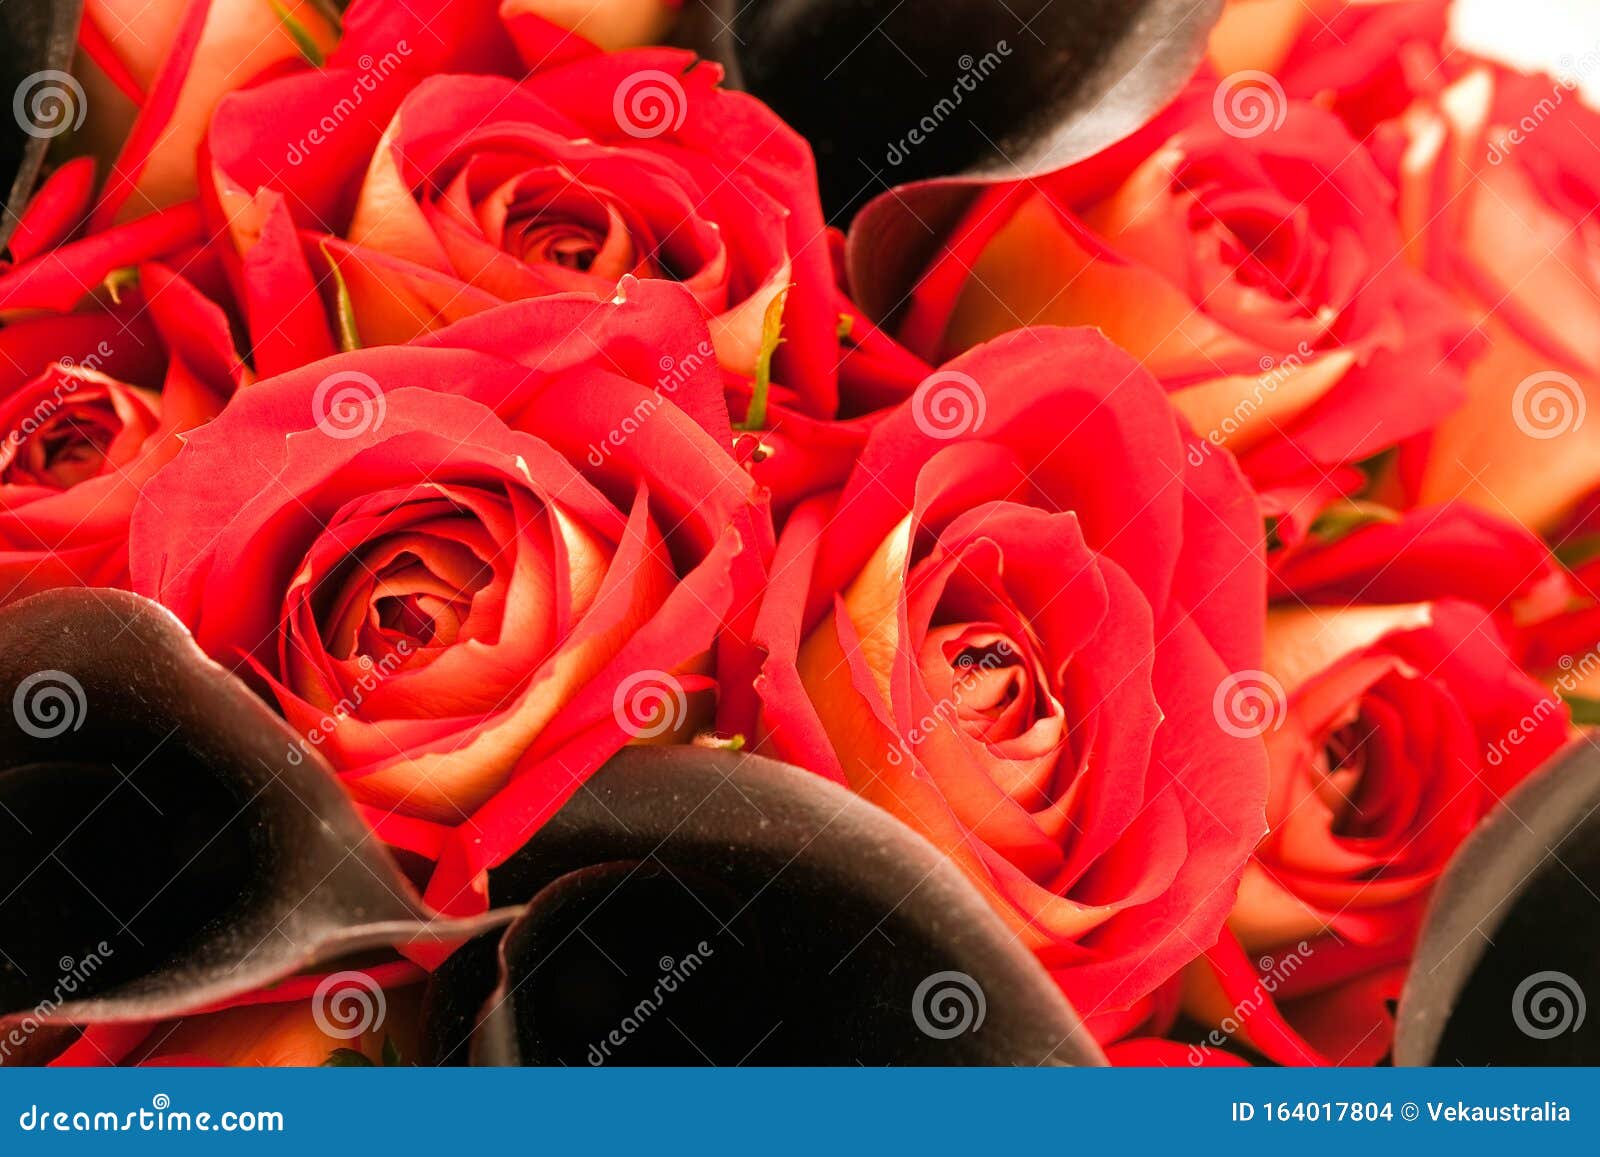 Red Rose And Black Calla Lily Bouquet Stock Photo Image Of Bouquet Beautiful 164017804